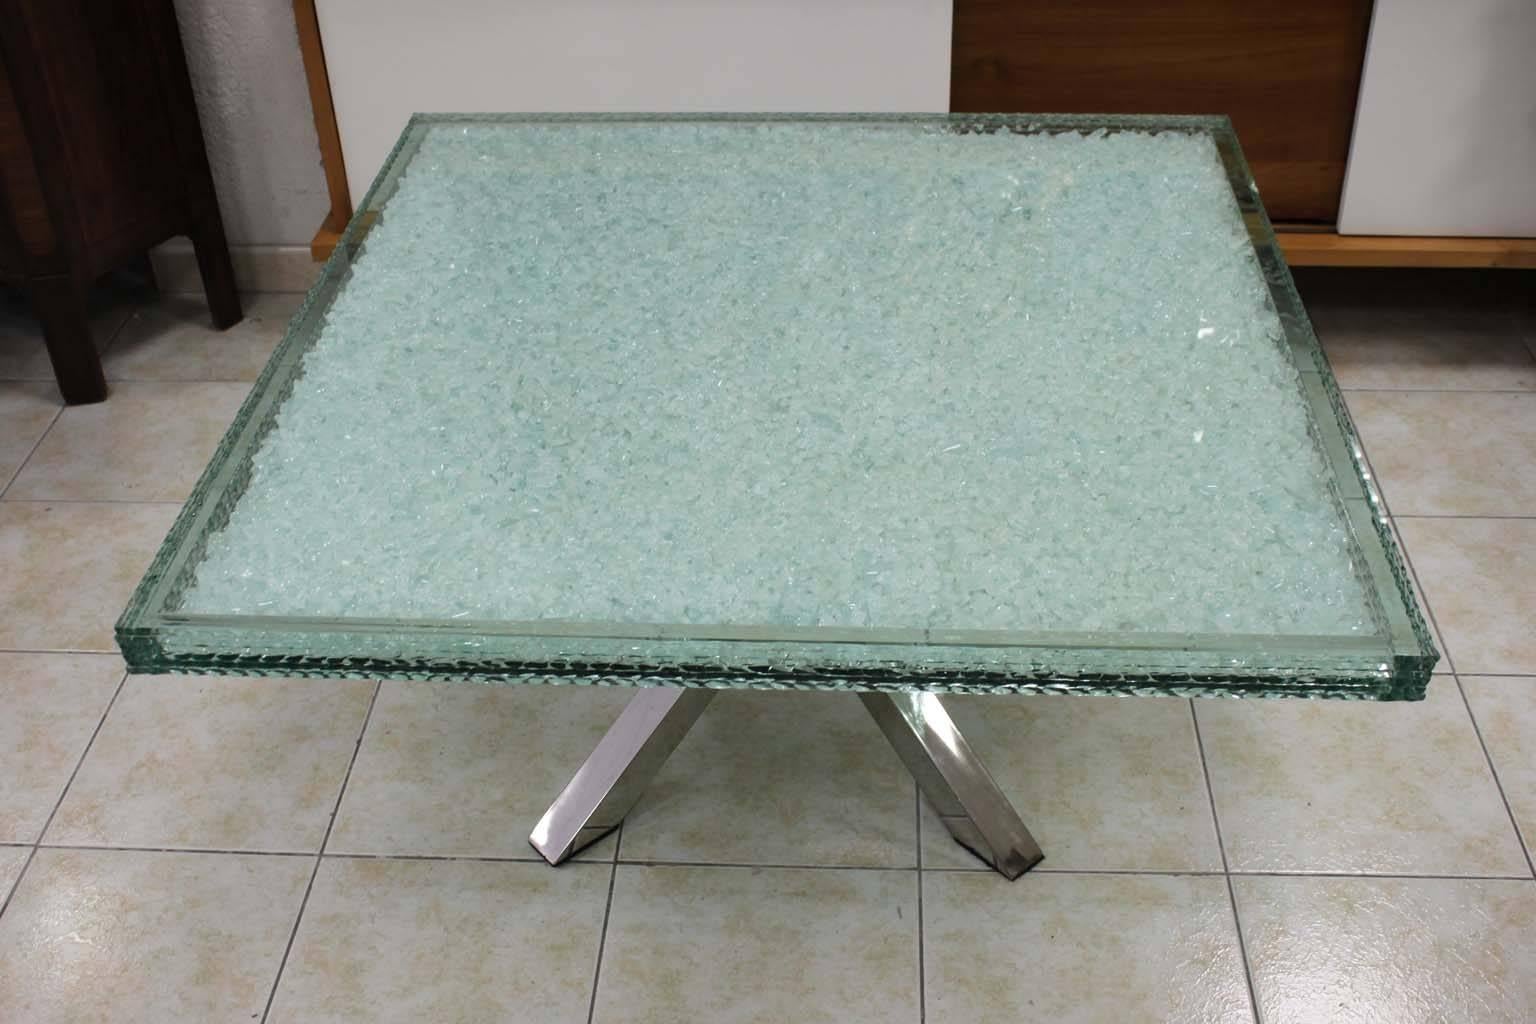 Beautiful modern coffee table made with glass crystals and stainless steel base.
Very decorative design.
Dimensions: D 99 cm, W 99 cm, H 51.5 cm.